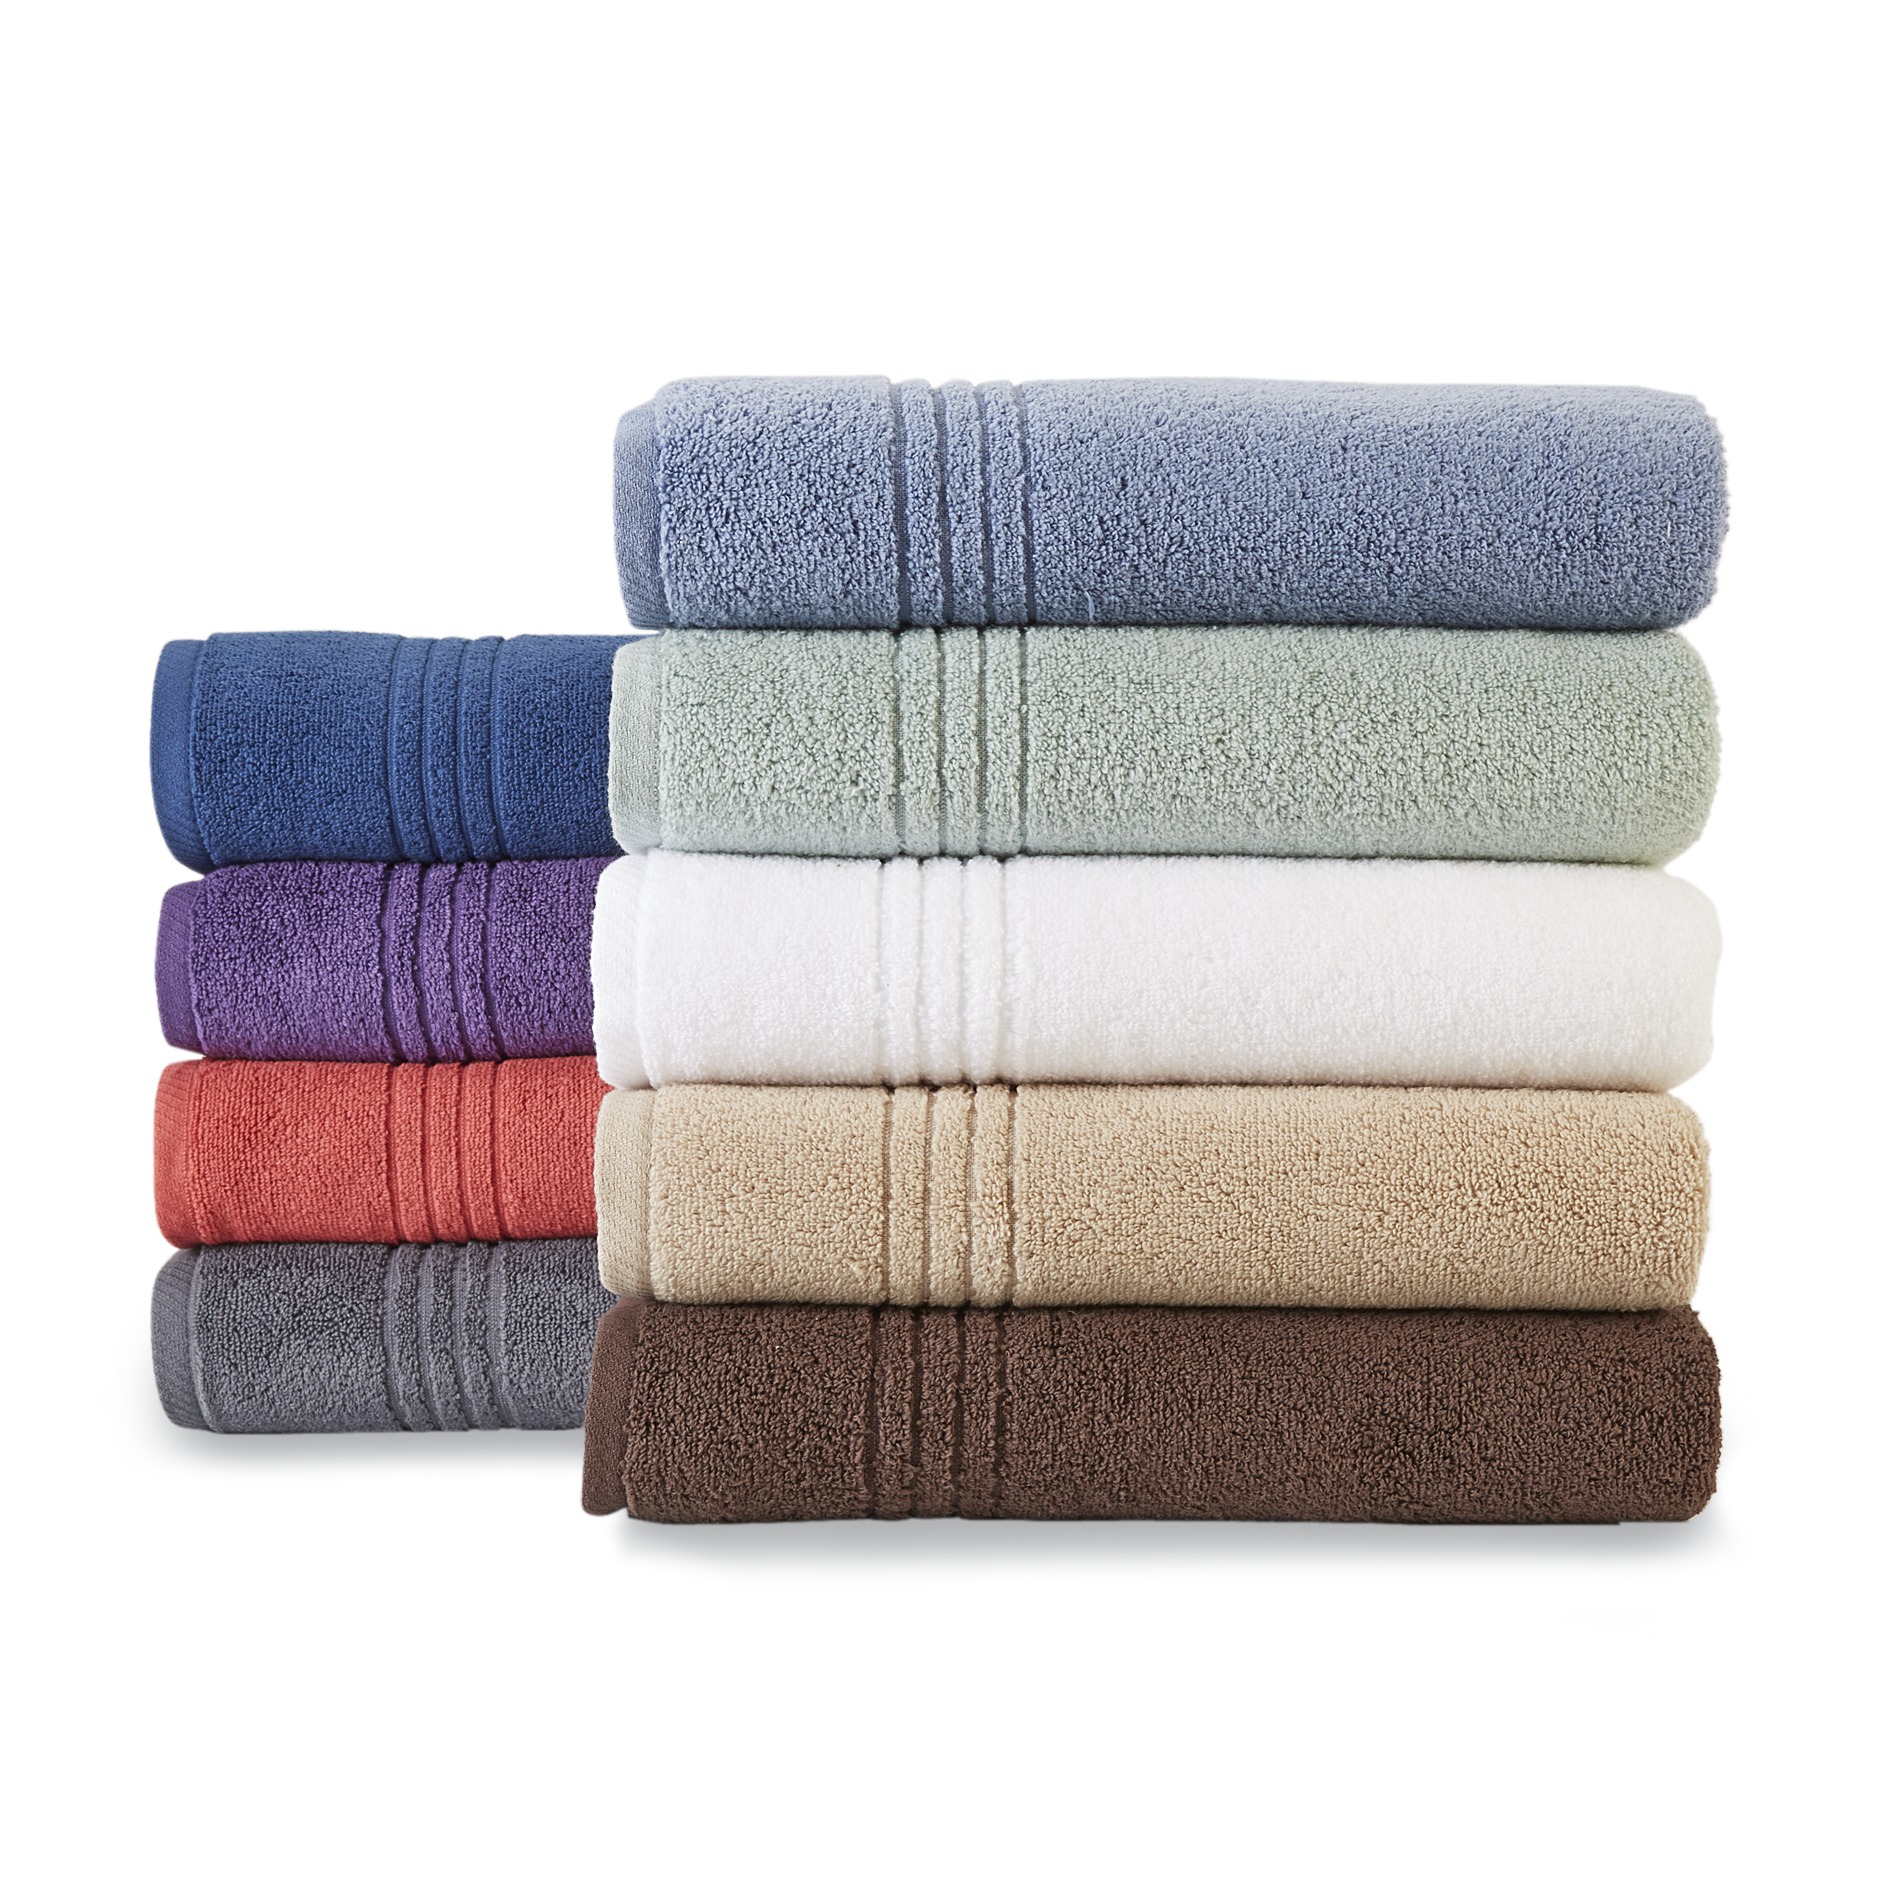 12-Pack Washcloth Set PureSoft Collection Woven Solid Color Absorbent Towels Dark Grey Eco-Friendly Bathroom Towels 